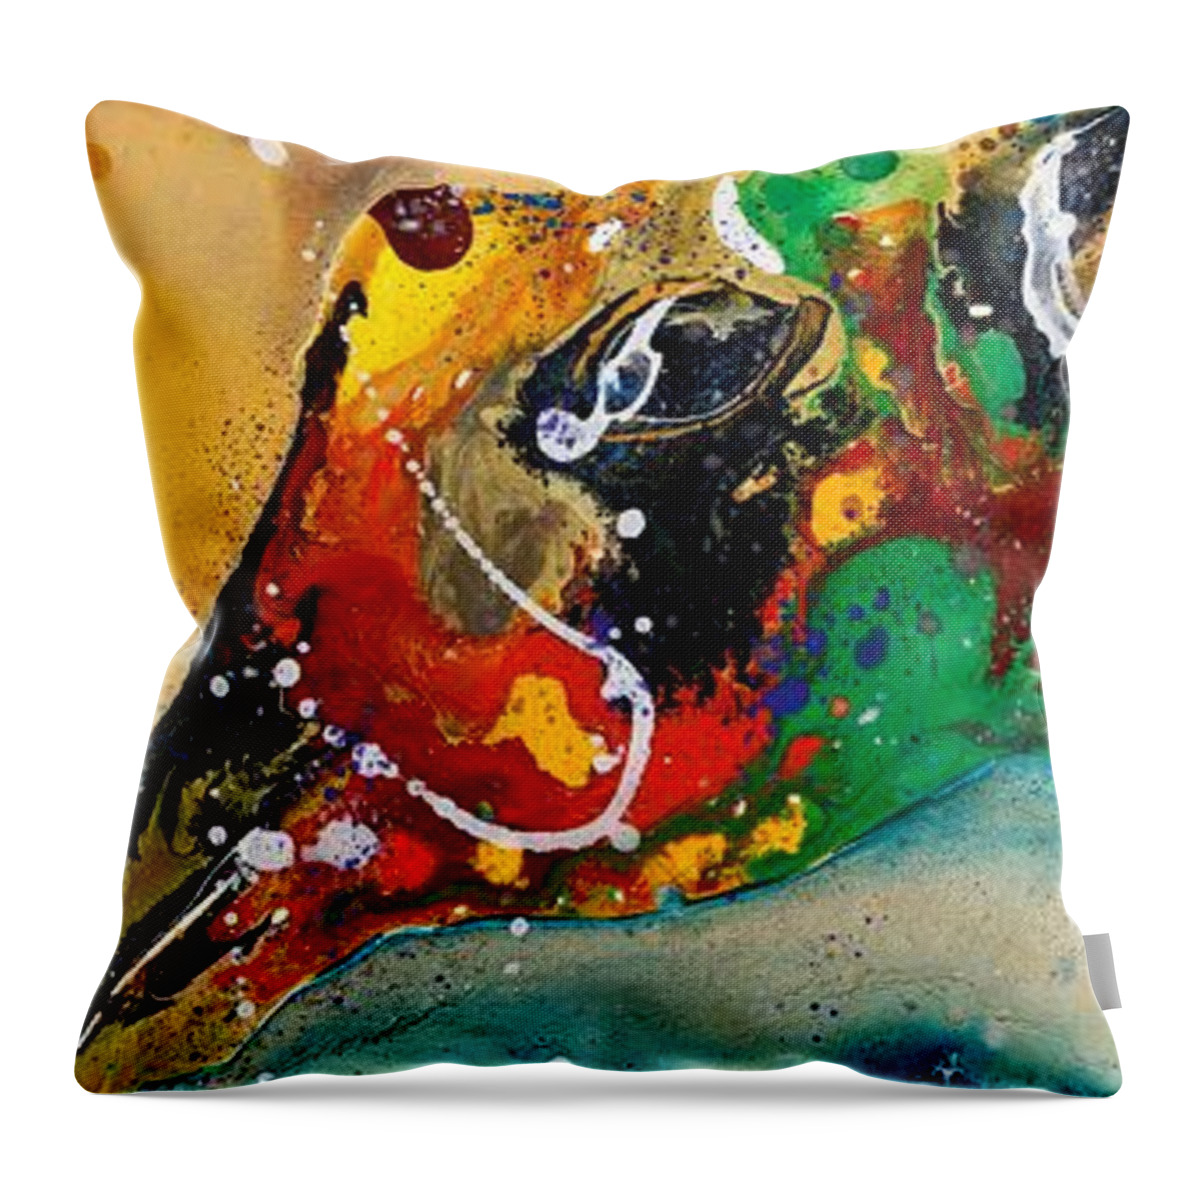 Giraffe Throw Pillow featuring the painting Stretch by Kasha Ritter